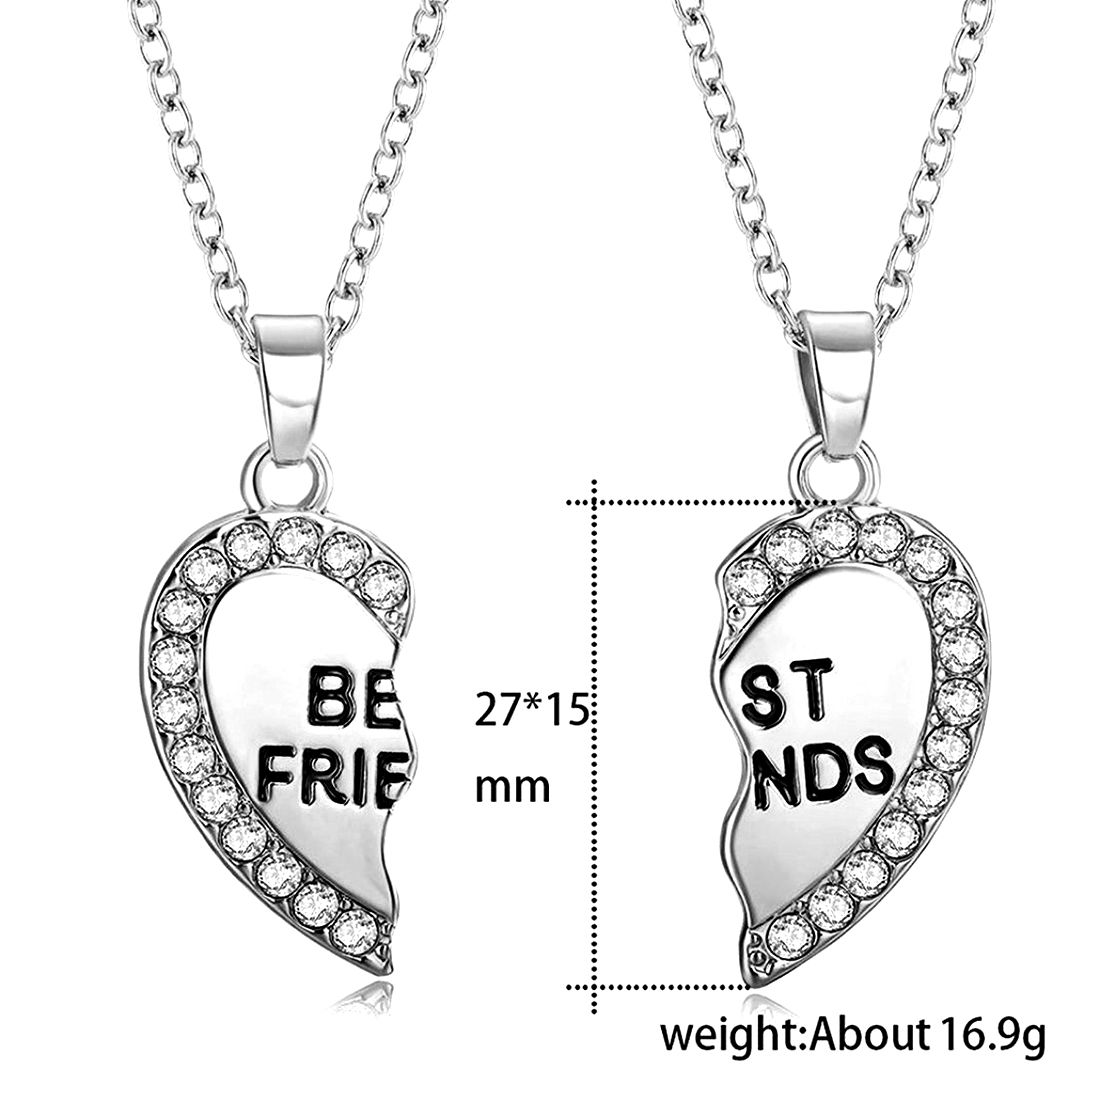 Couples Necklace, Creative Key Necklace, Best Friend Necklaces , Bff  Necklace, Matching Friend Necklace, Silver Best Friend Jewelry, Friendship  Necklaces, Gift | Wish